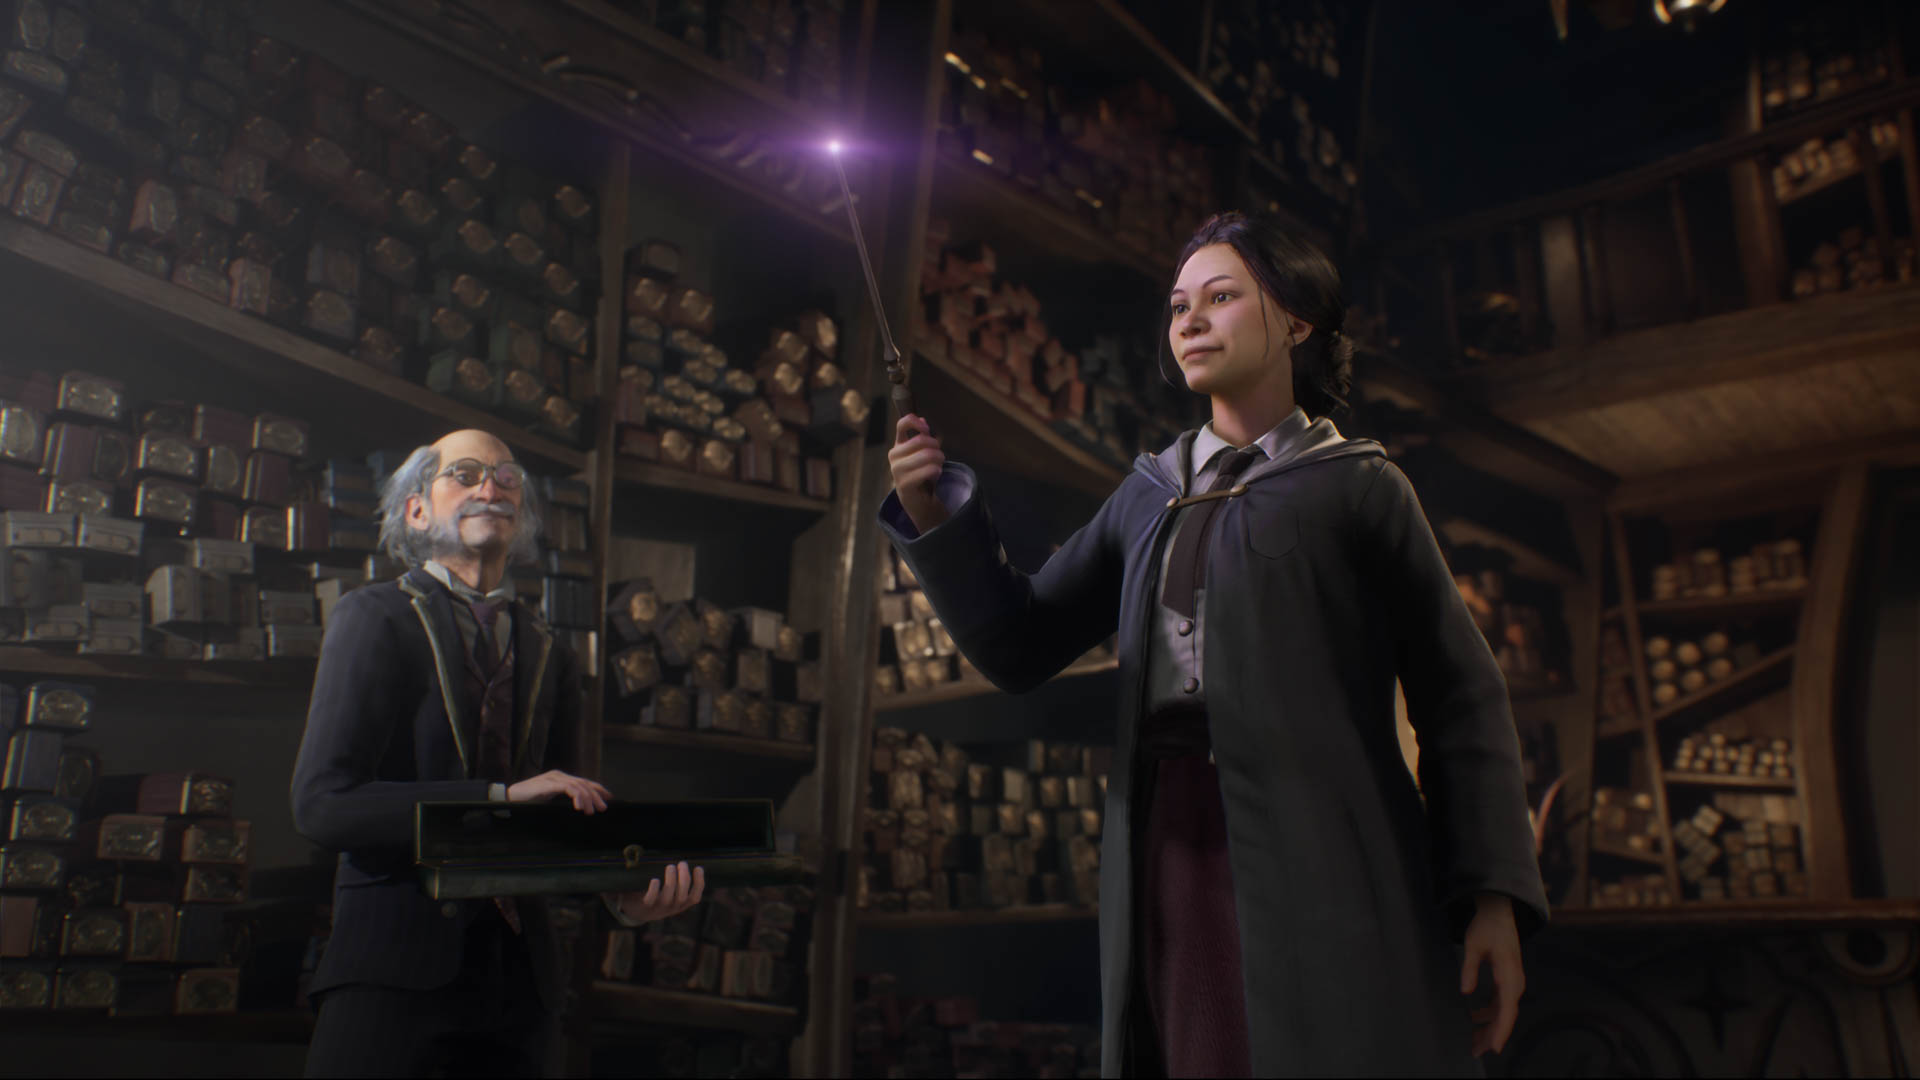 A Hogwarts student buys their first wand